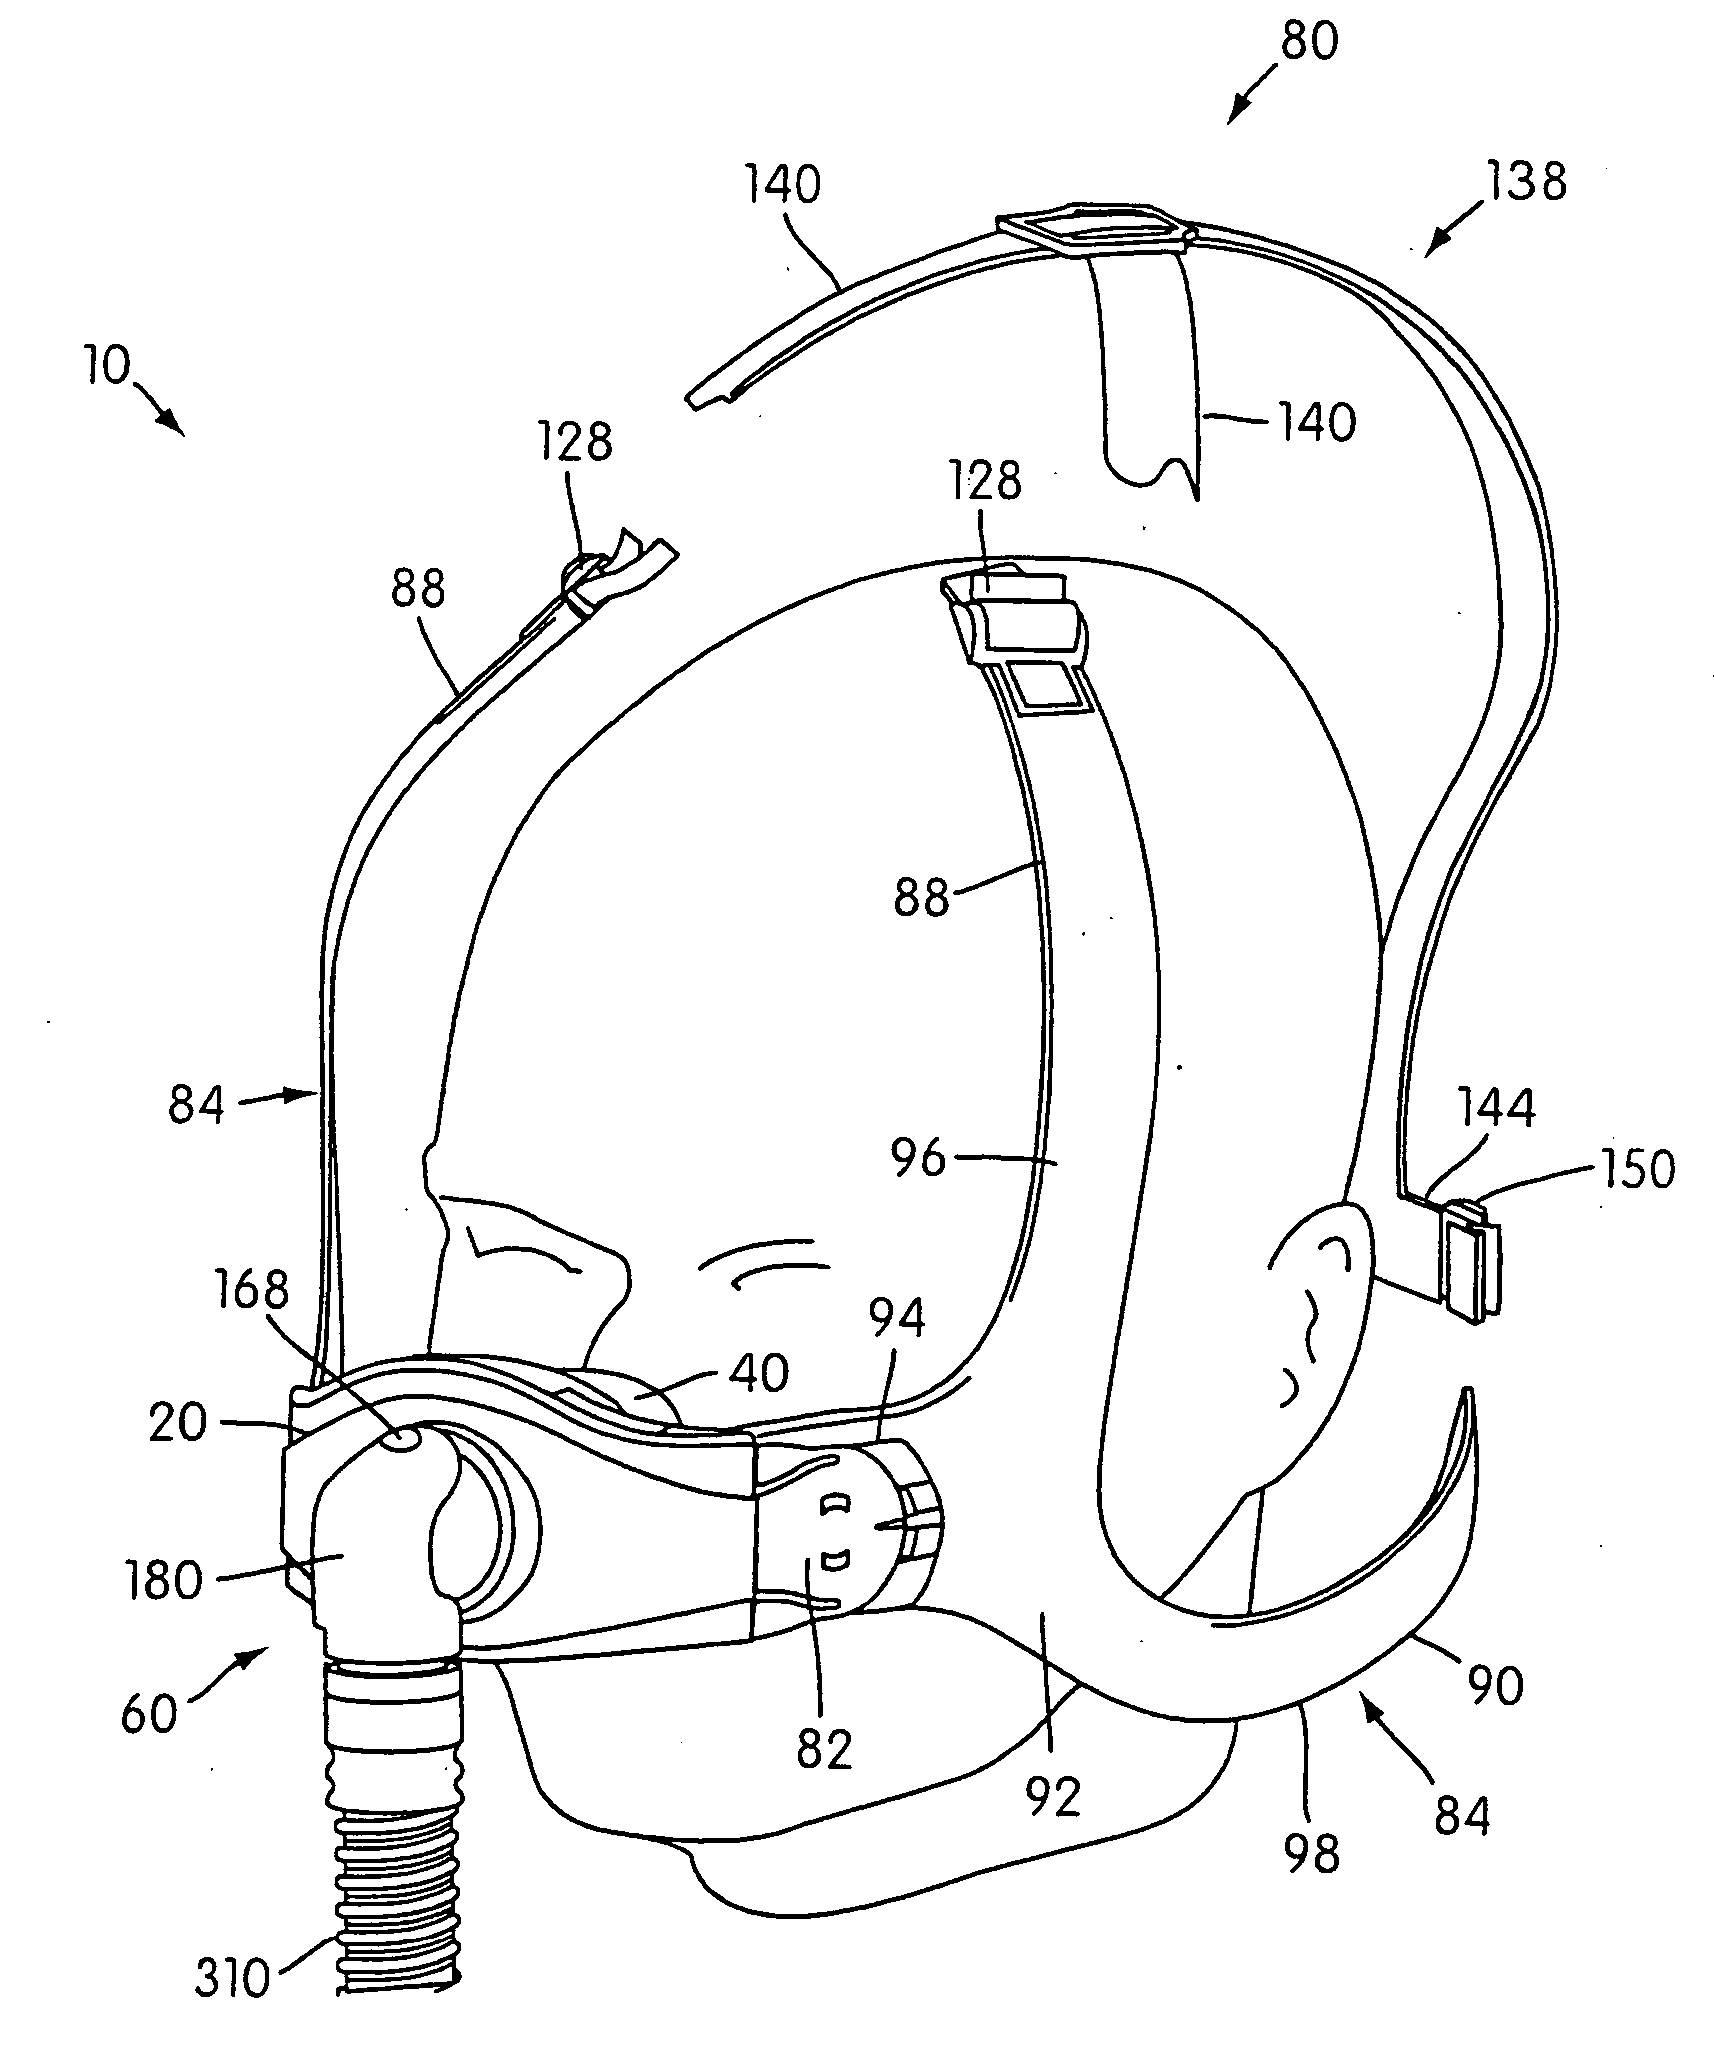 Ergonomic and adjustable respiratory mask assembly with headgear assembly